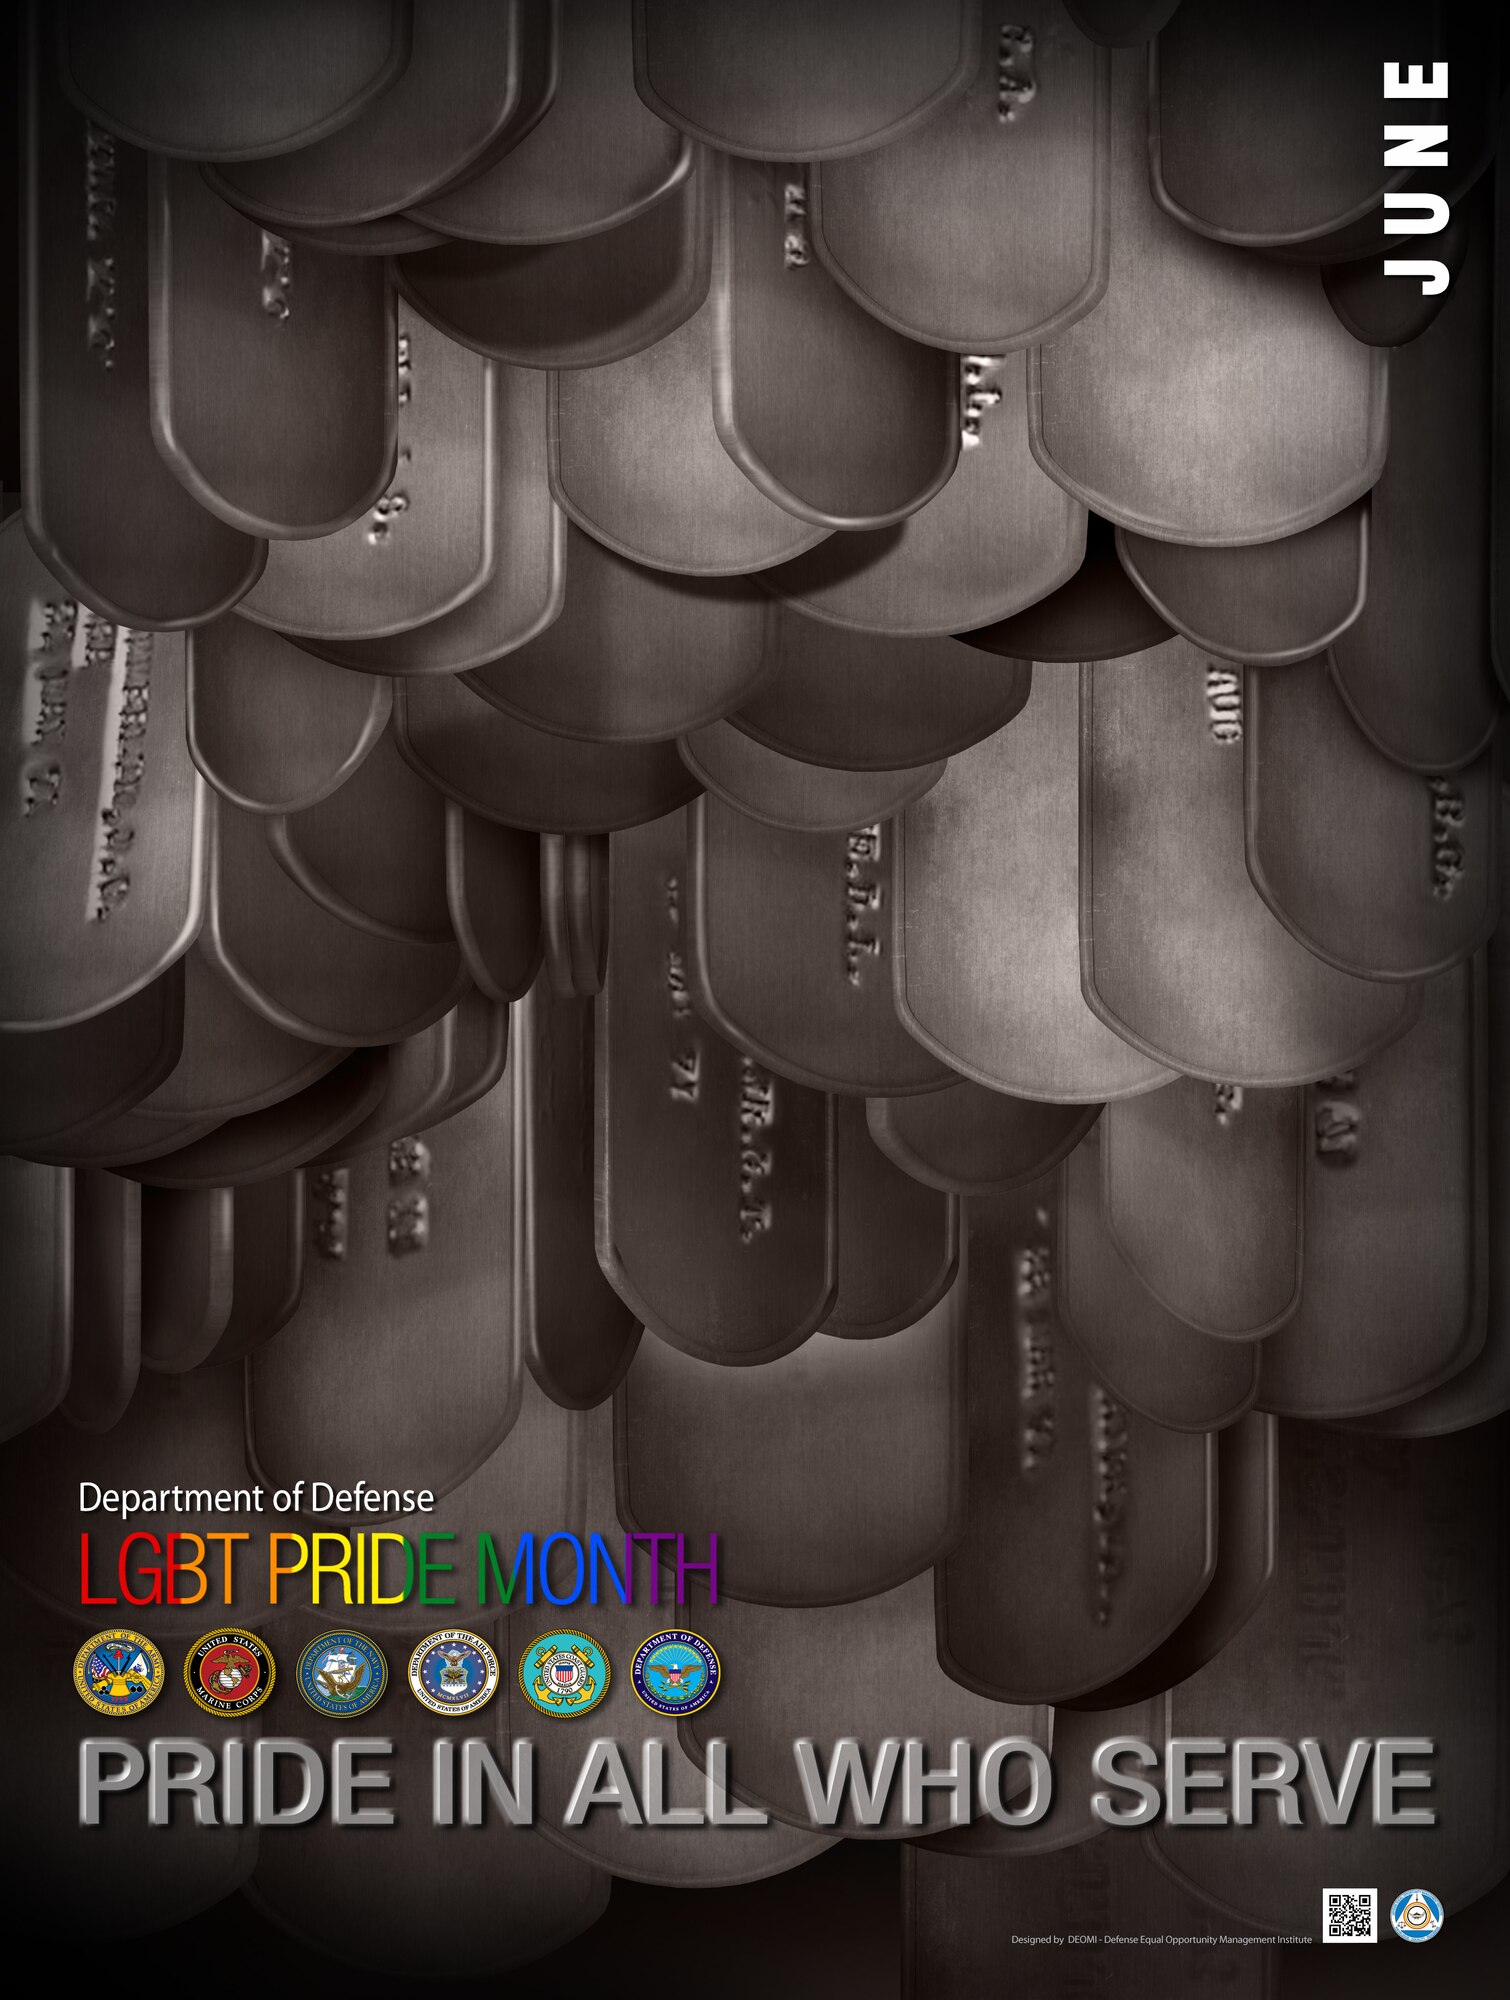 A graphic of several dog tags hanging with "LGBT Pride Month" written in rainbow lettering over it. The slogan "Pride in all who serve" is displayed at the bottom of the graphic.